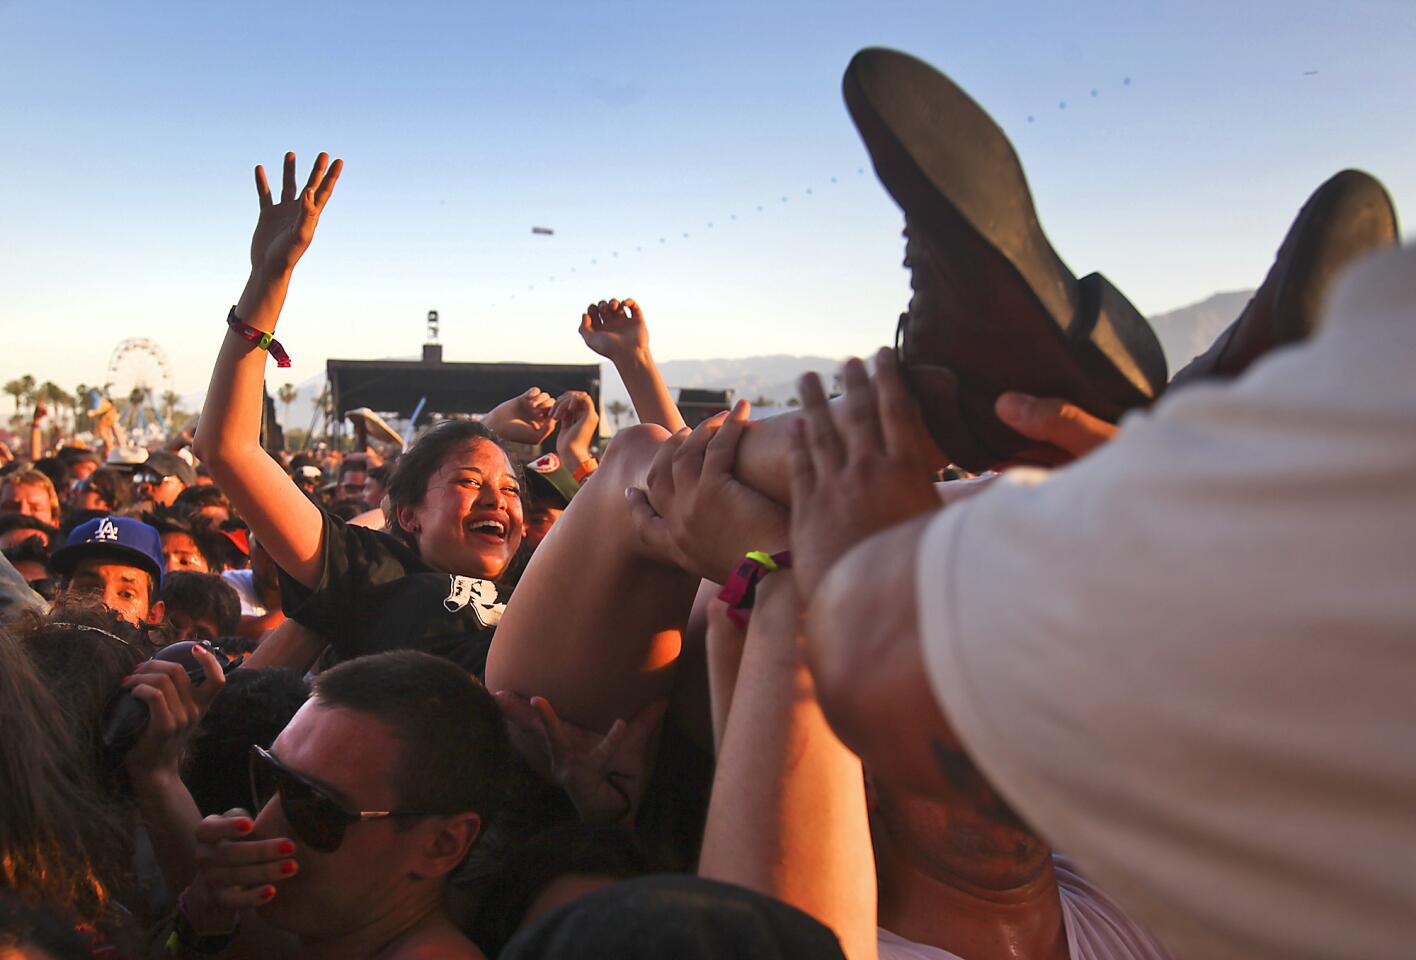 Concert goers are pulled from the crowd by security officers after being packed in dangerously tight as Death from Above 1979 perform at the Coachella Valley Music and Arts Festival, 2011.